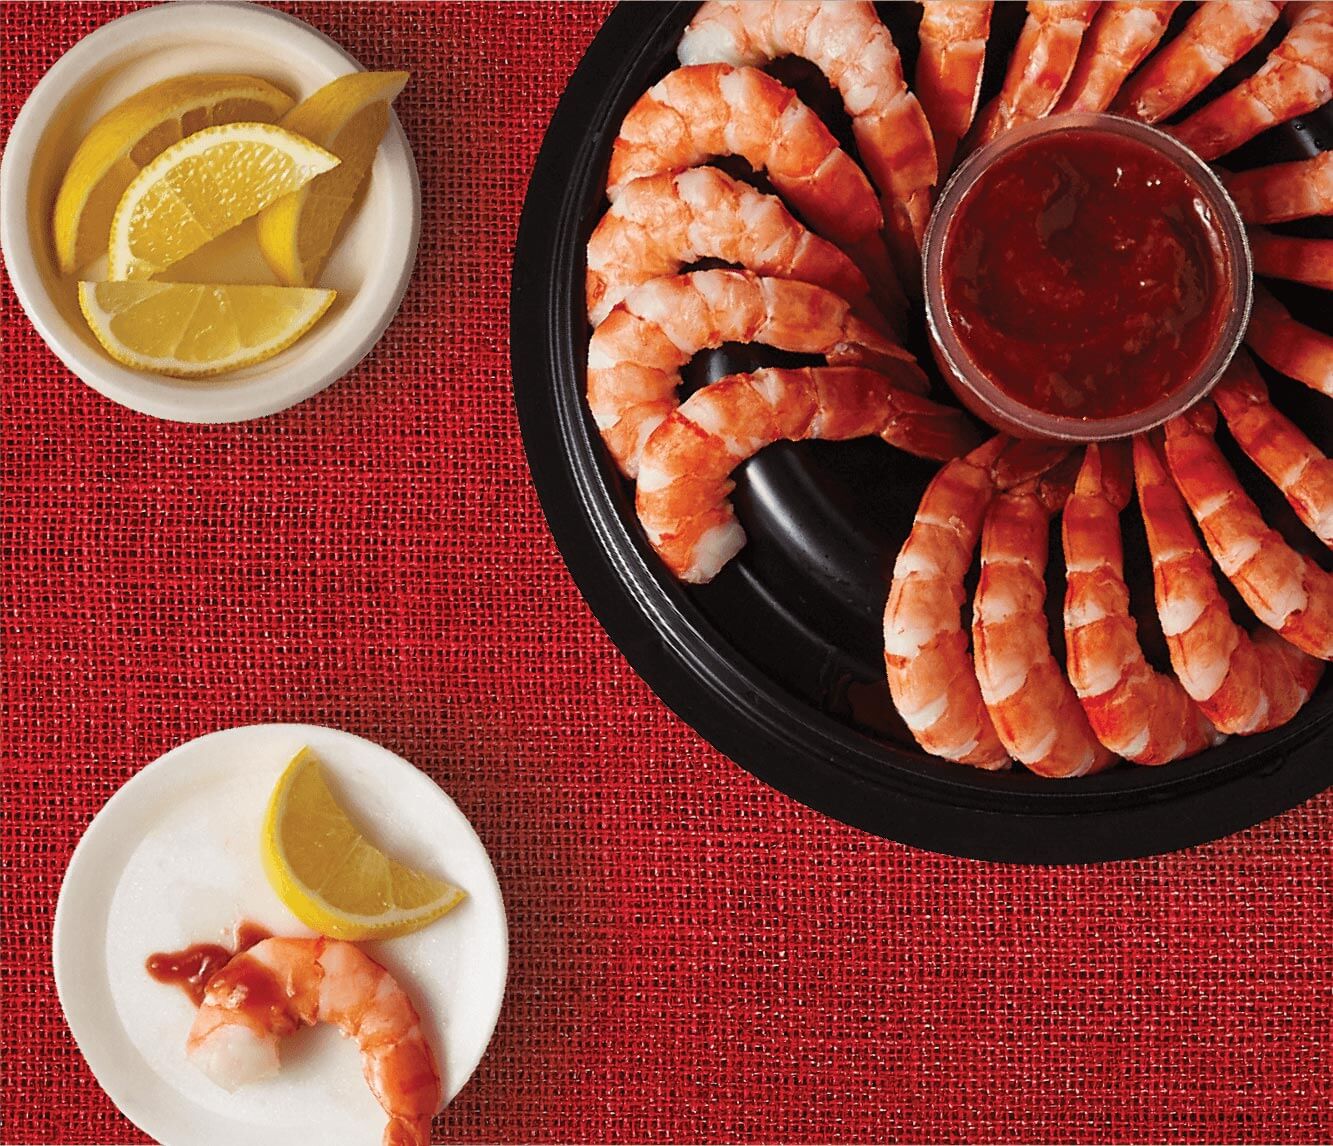 A pack shot of an open Compliments Shrimp Ring with Cocktail Sauce, a plate of lemon wedges and a small plate with a single shrimp and slice of lemon on top.